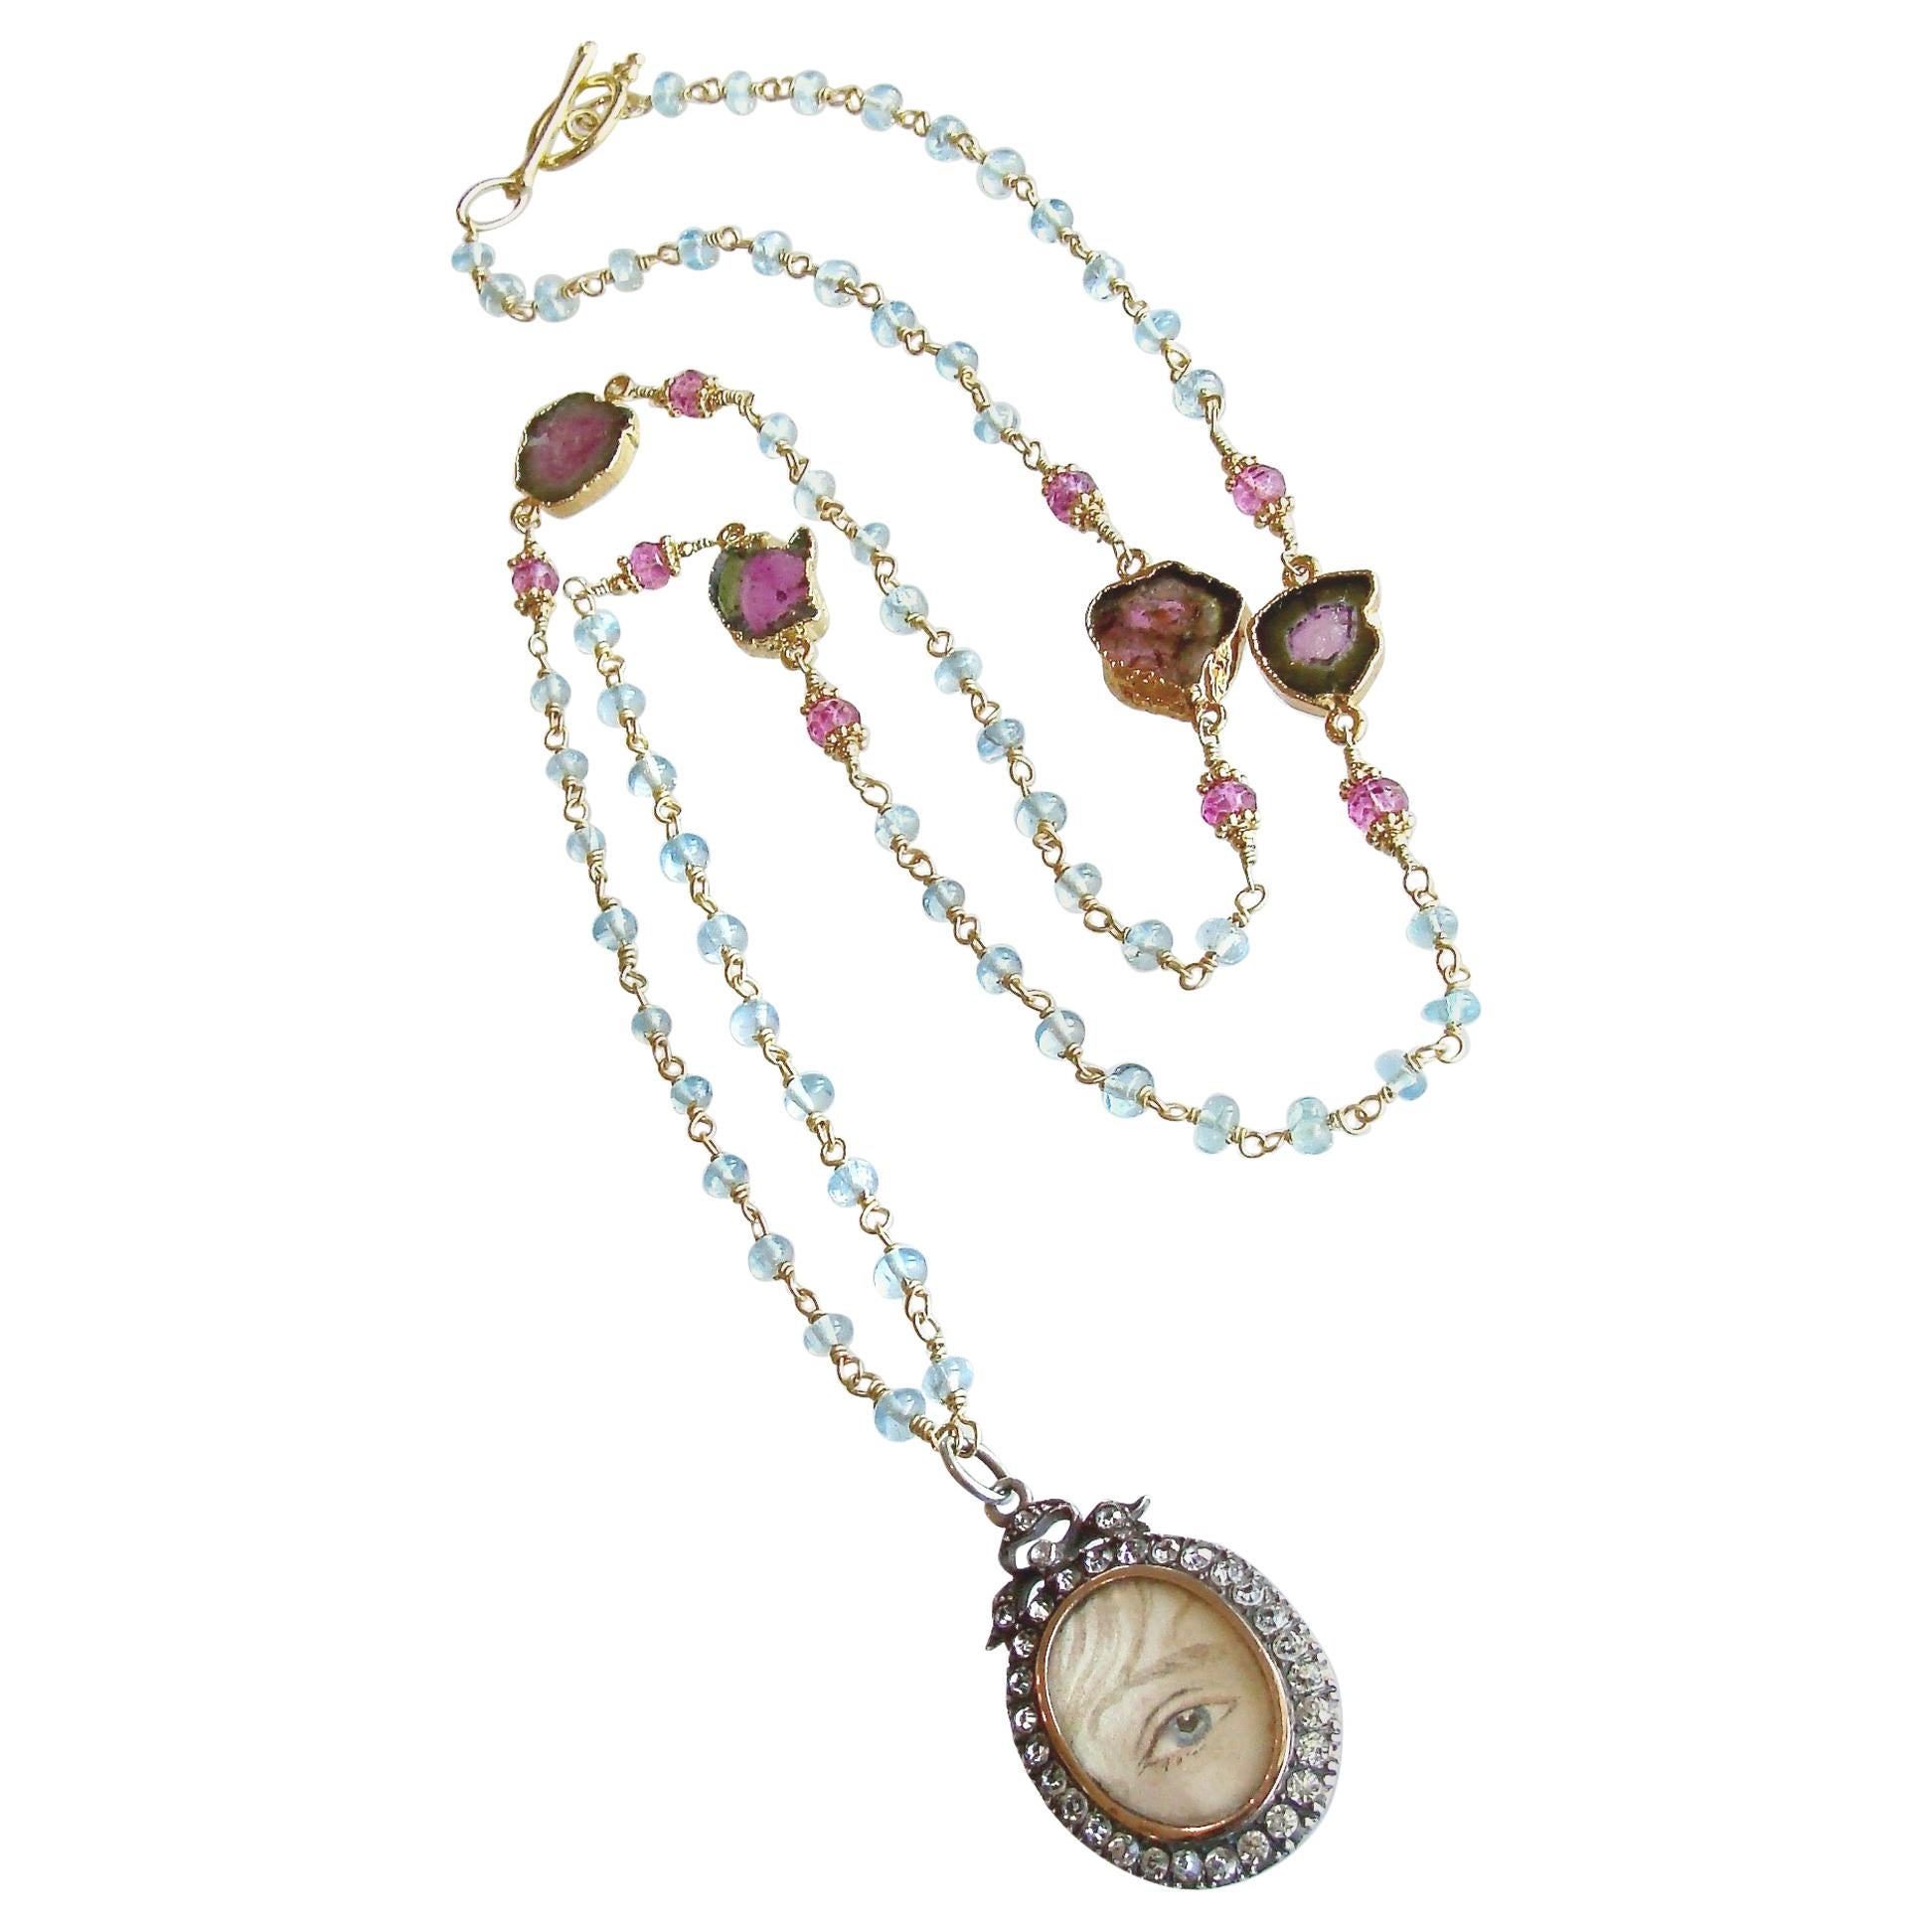 Lovers Eye Blue Topaz and Watermelon Tourmaline Necklace, Isabella II Necklace